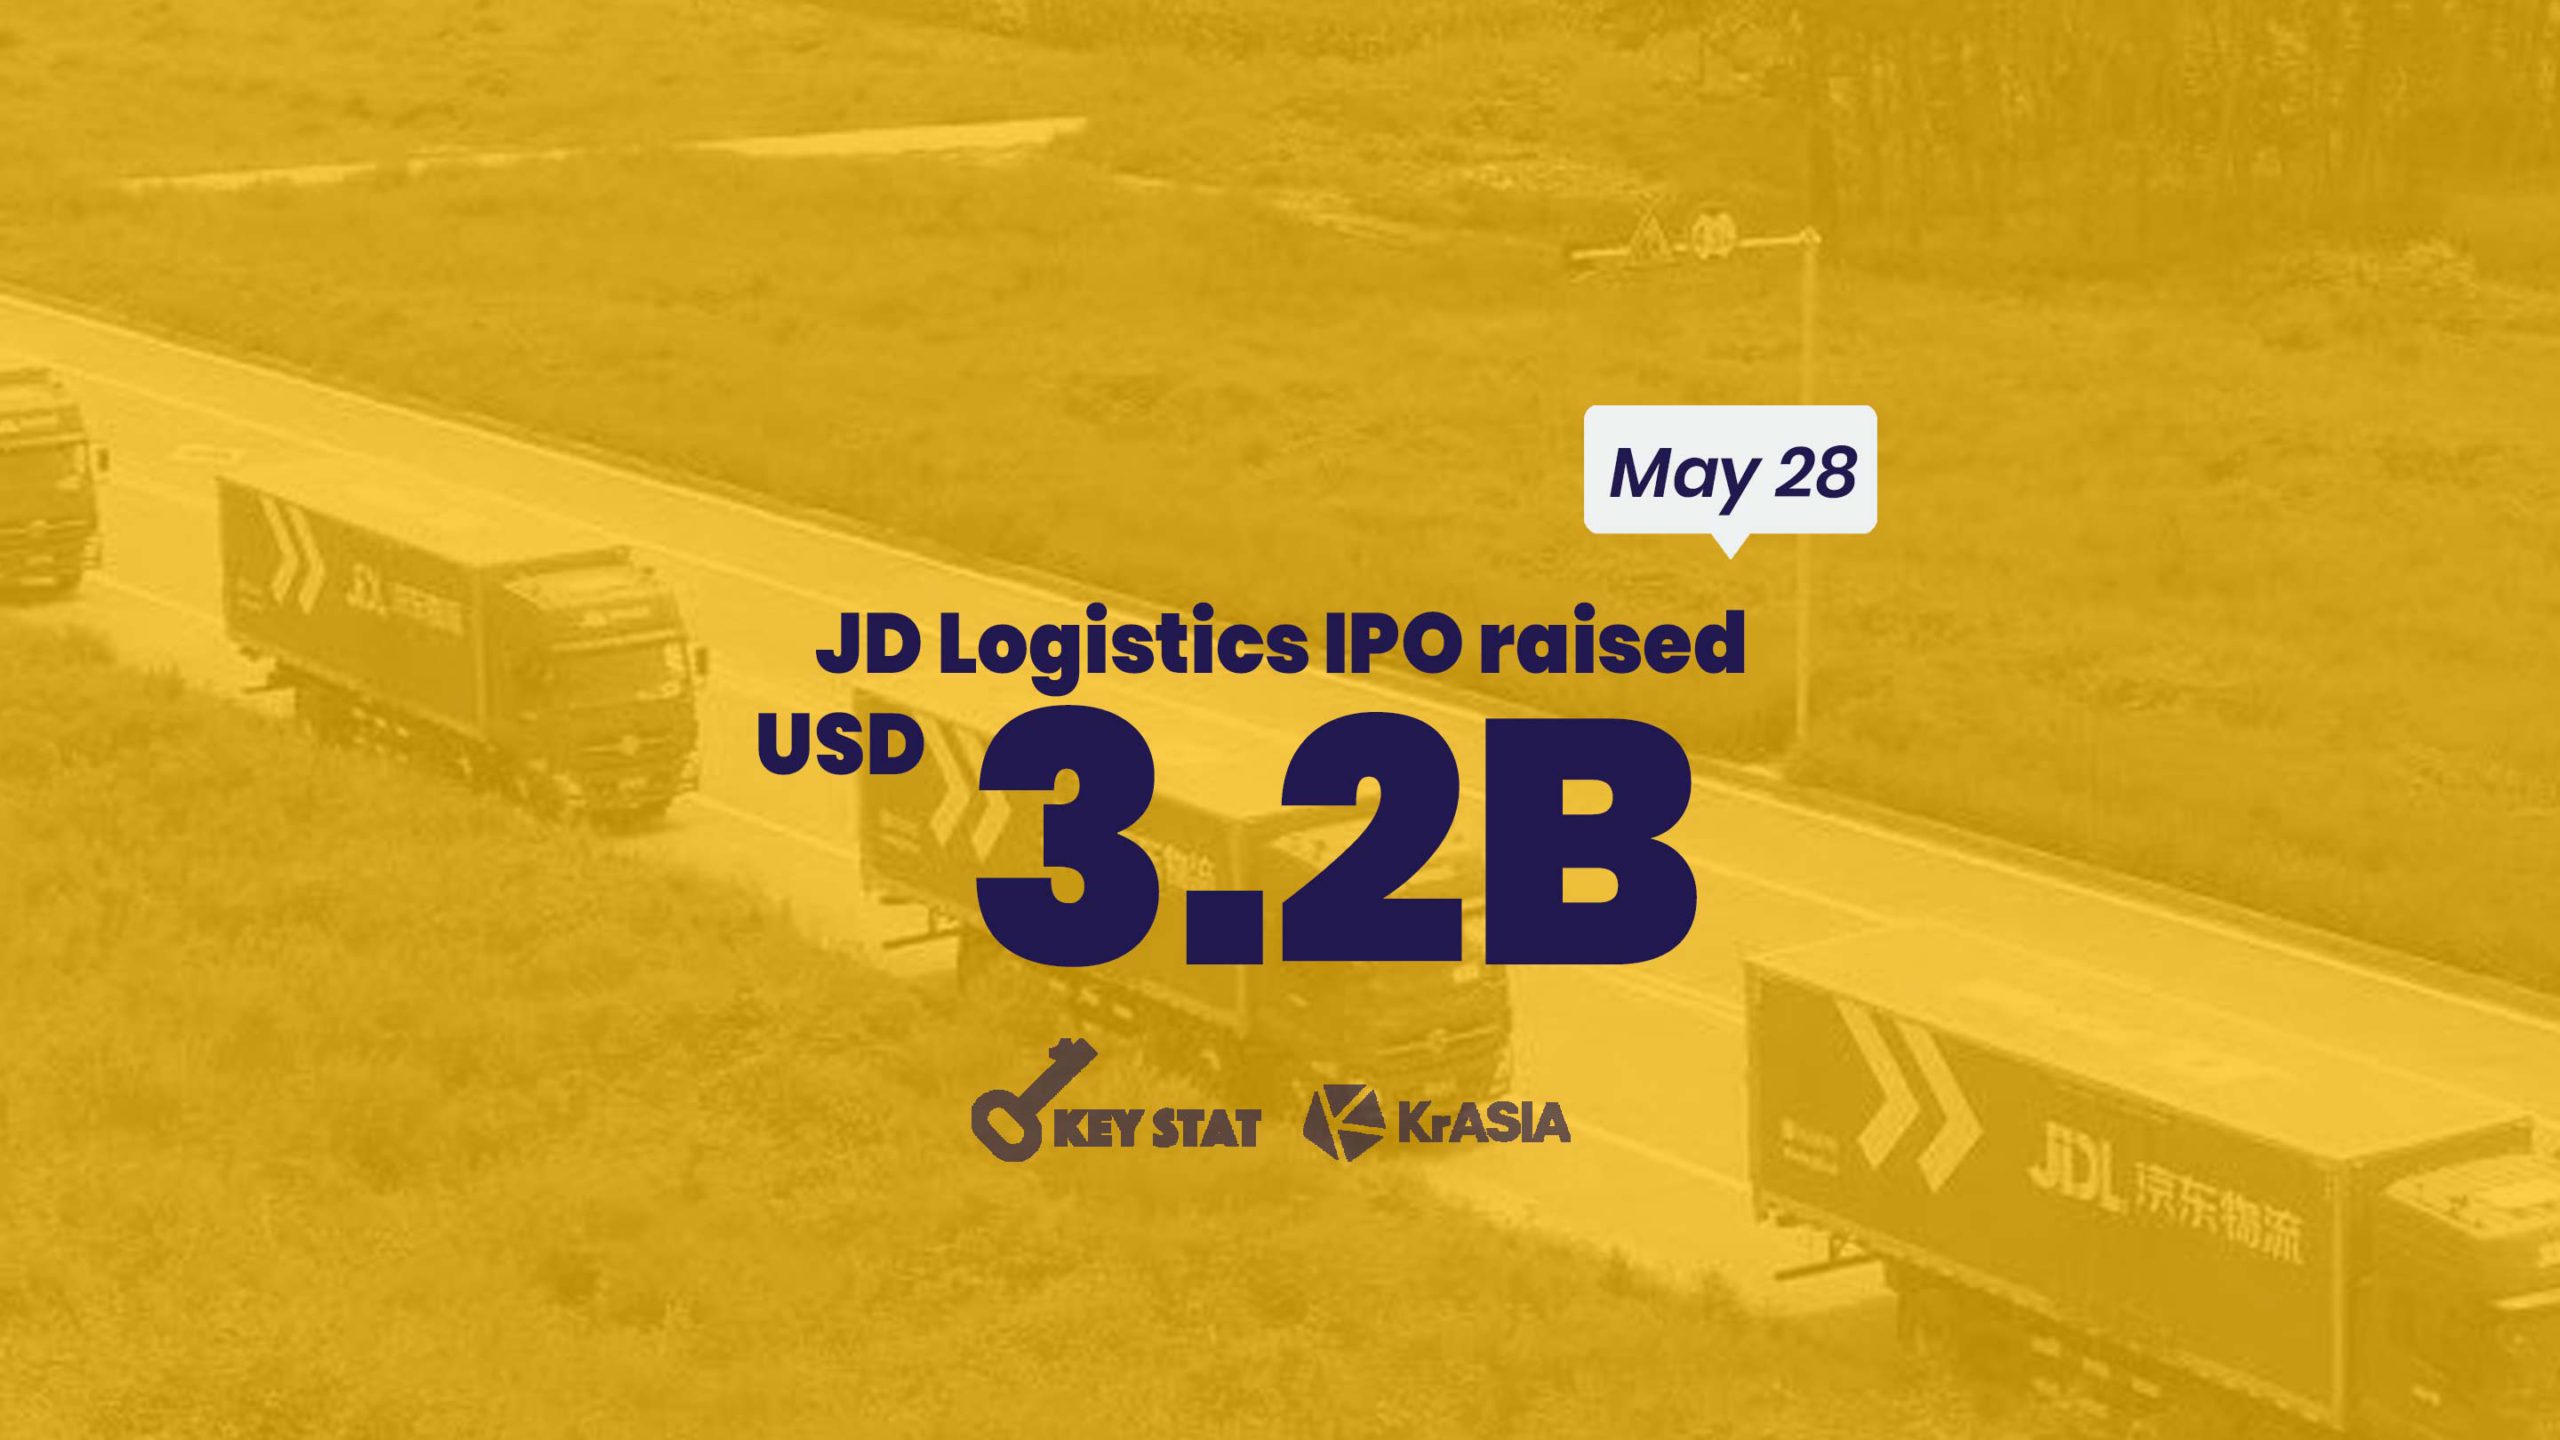 KEY STAT | JD Logistics shares surge in second-biggest Hong Kong IPO in 2021